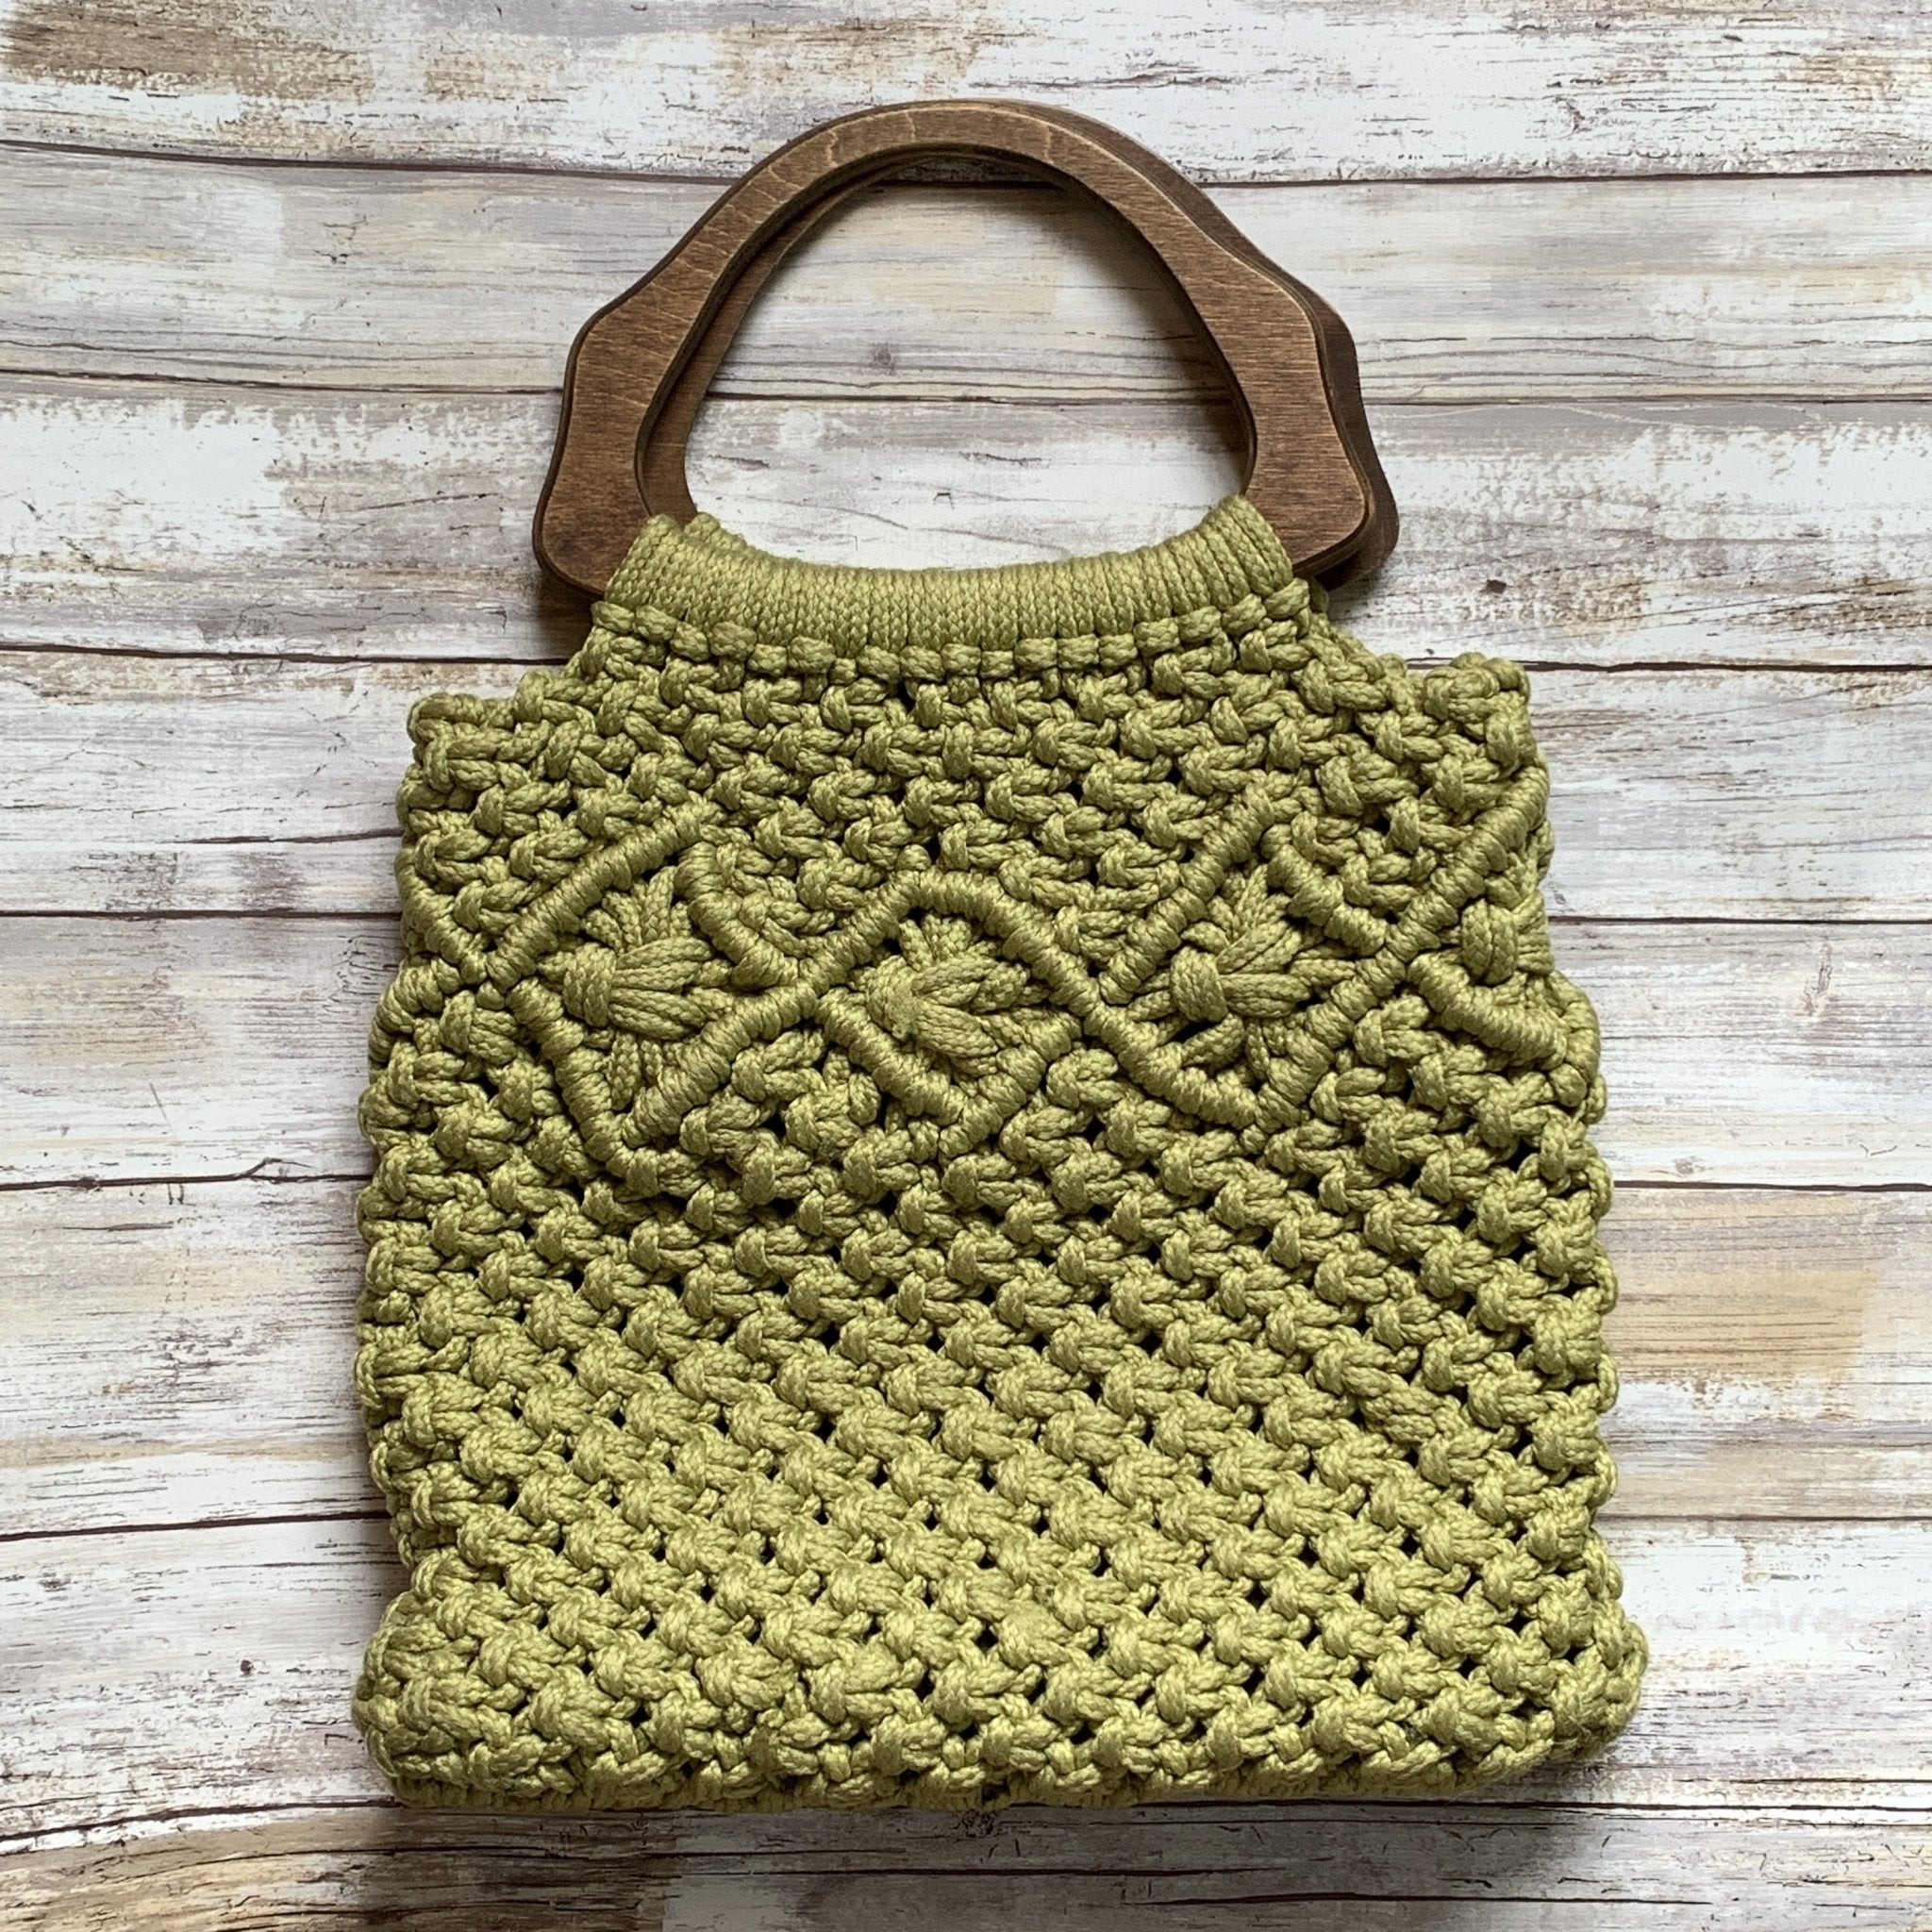 How to Crochet a Round Handle Bag, easy purse crochet pattern, video # 1256  - YouTube